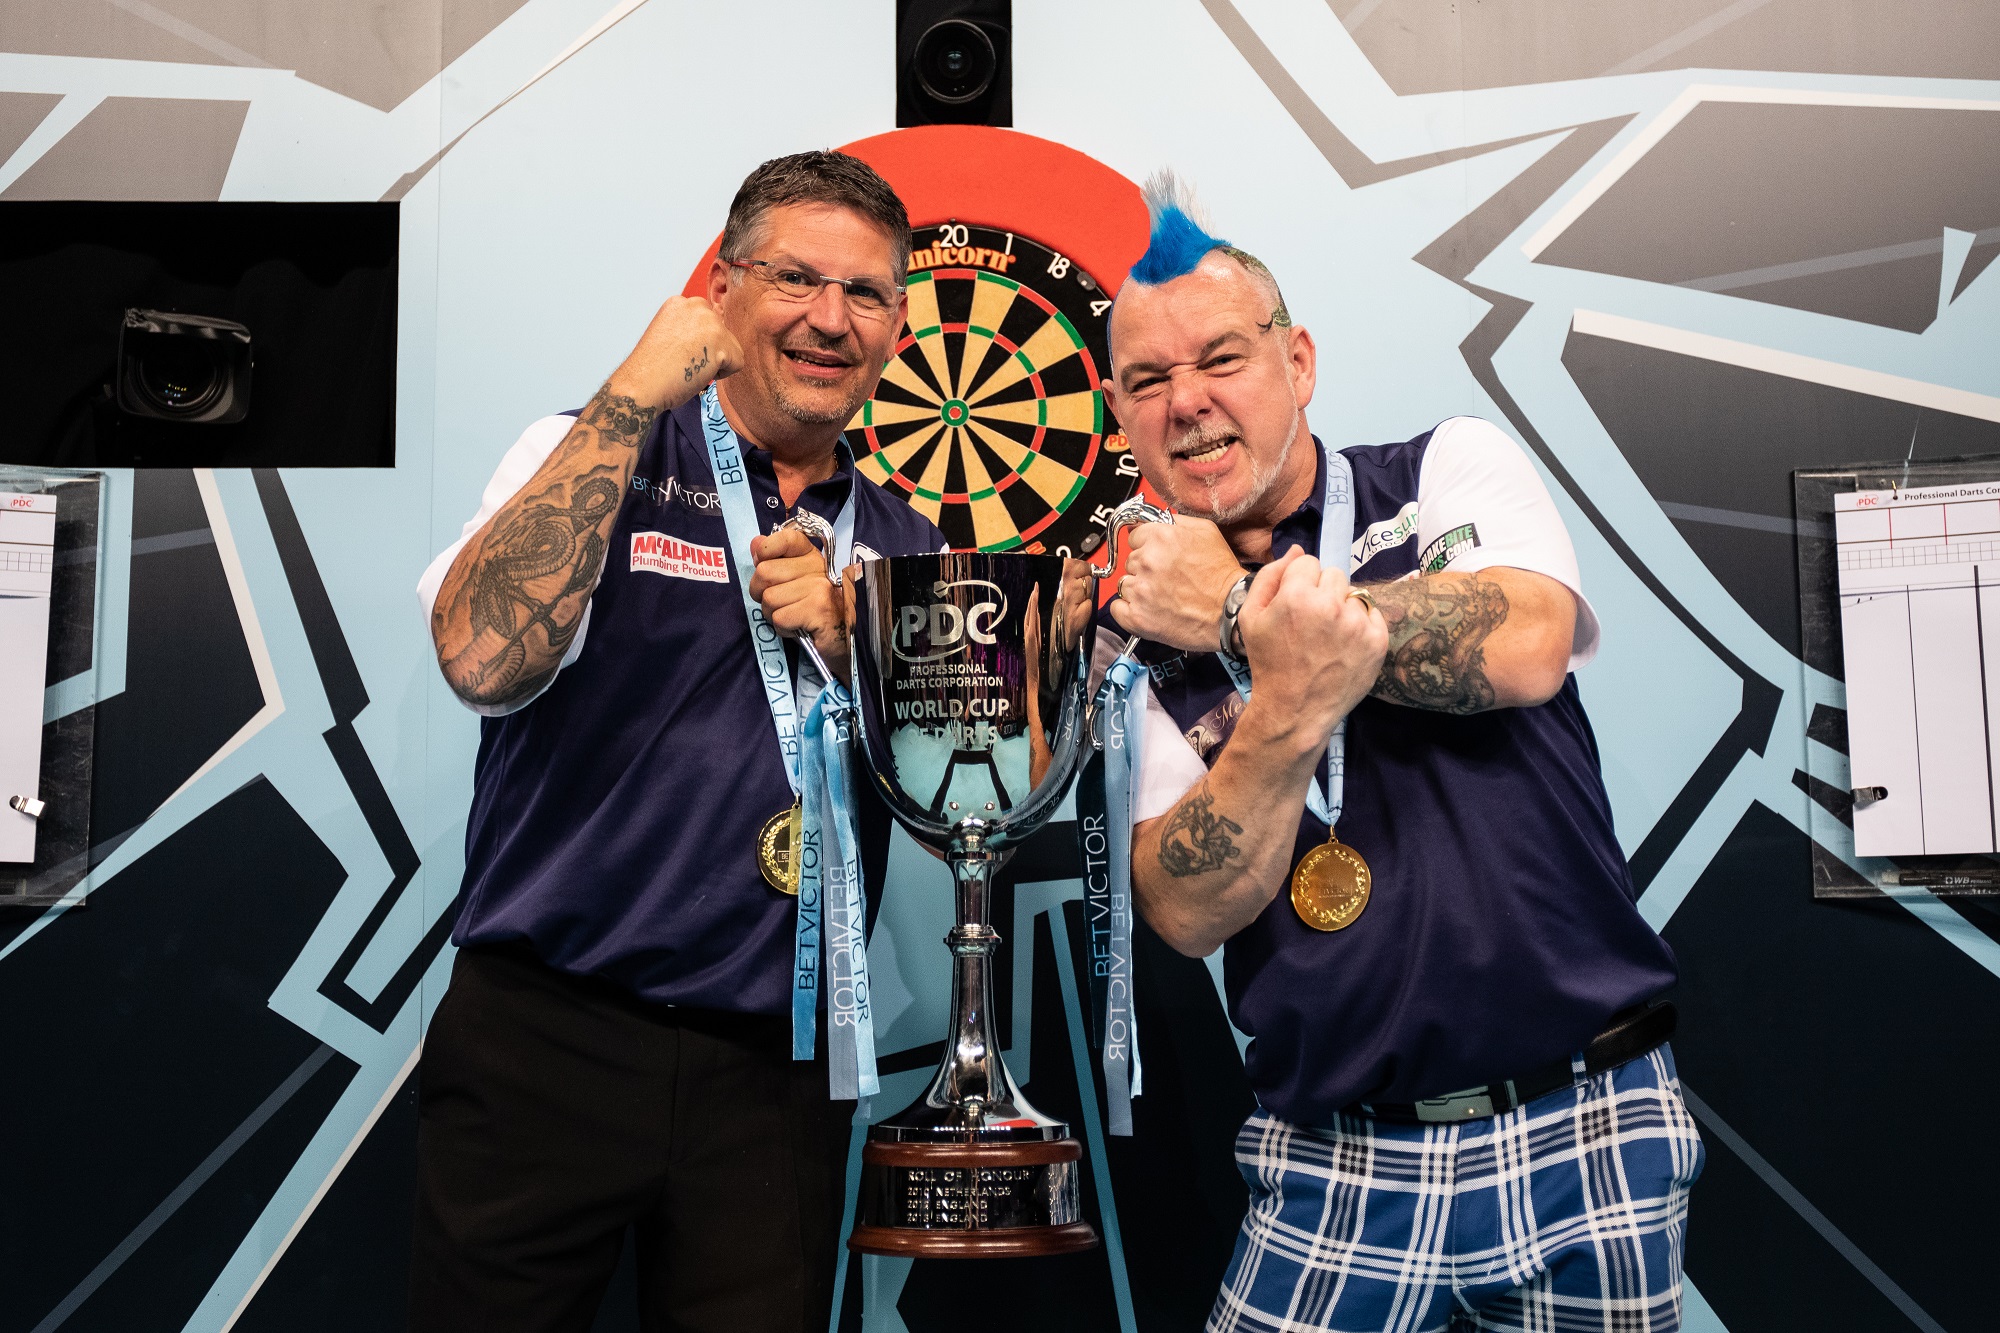 World Cup glory for Gary and Scotland